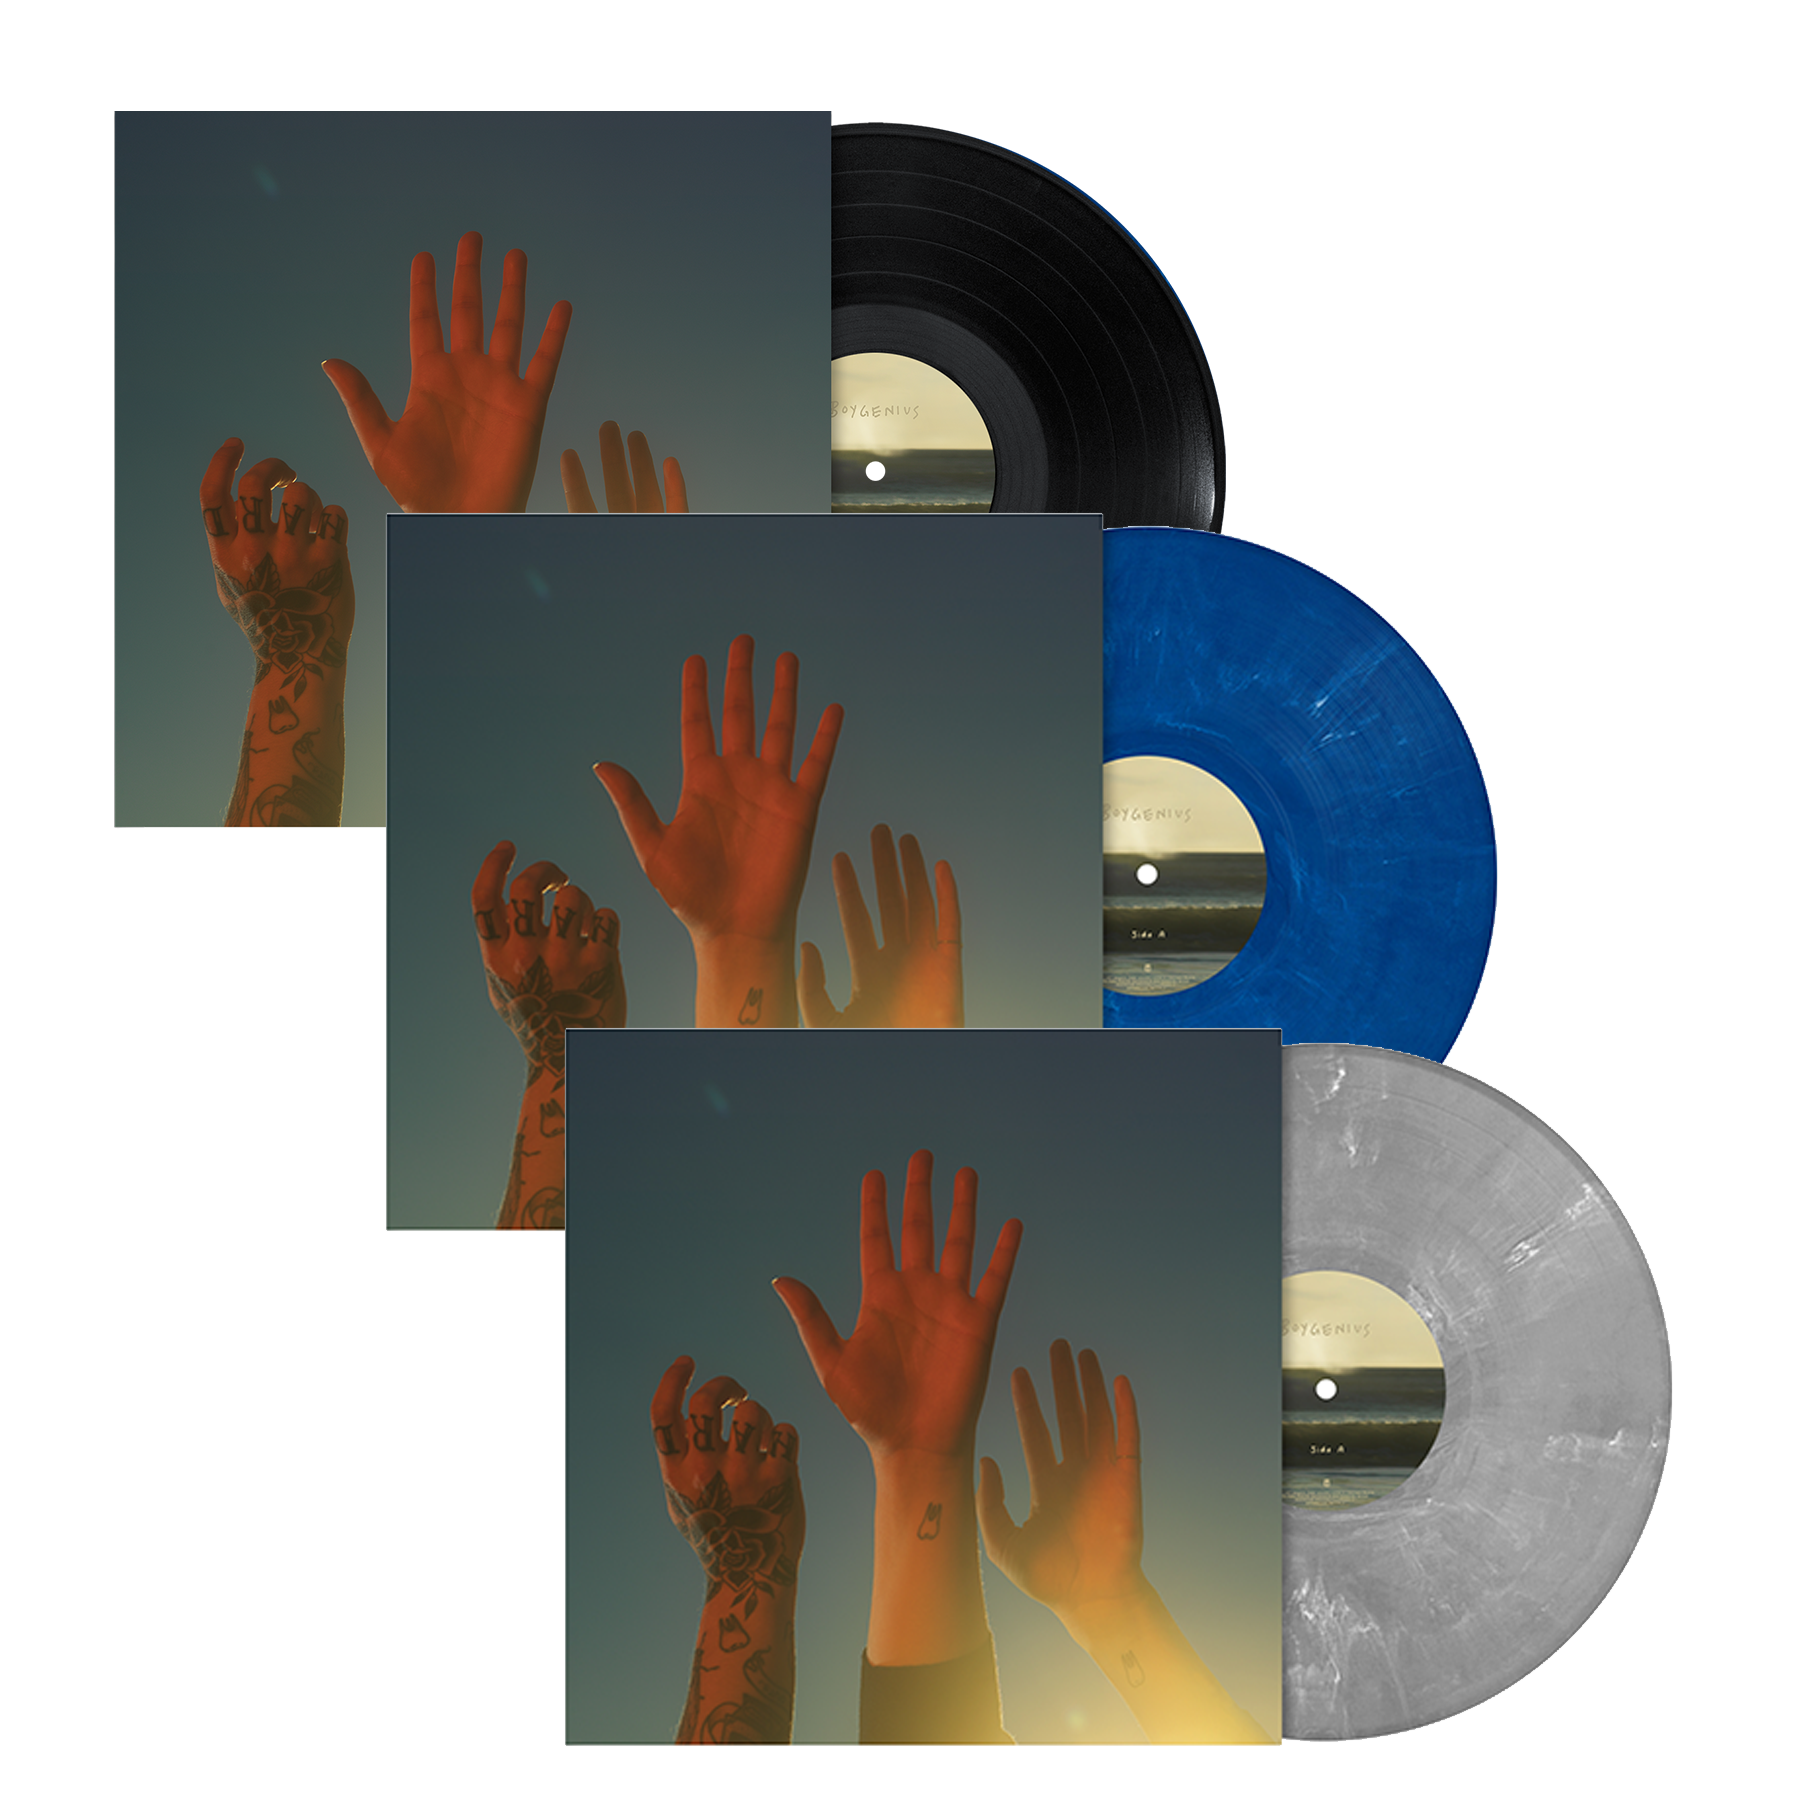 the record: Limited Blue, Limited Silver + Black Vinyl LP